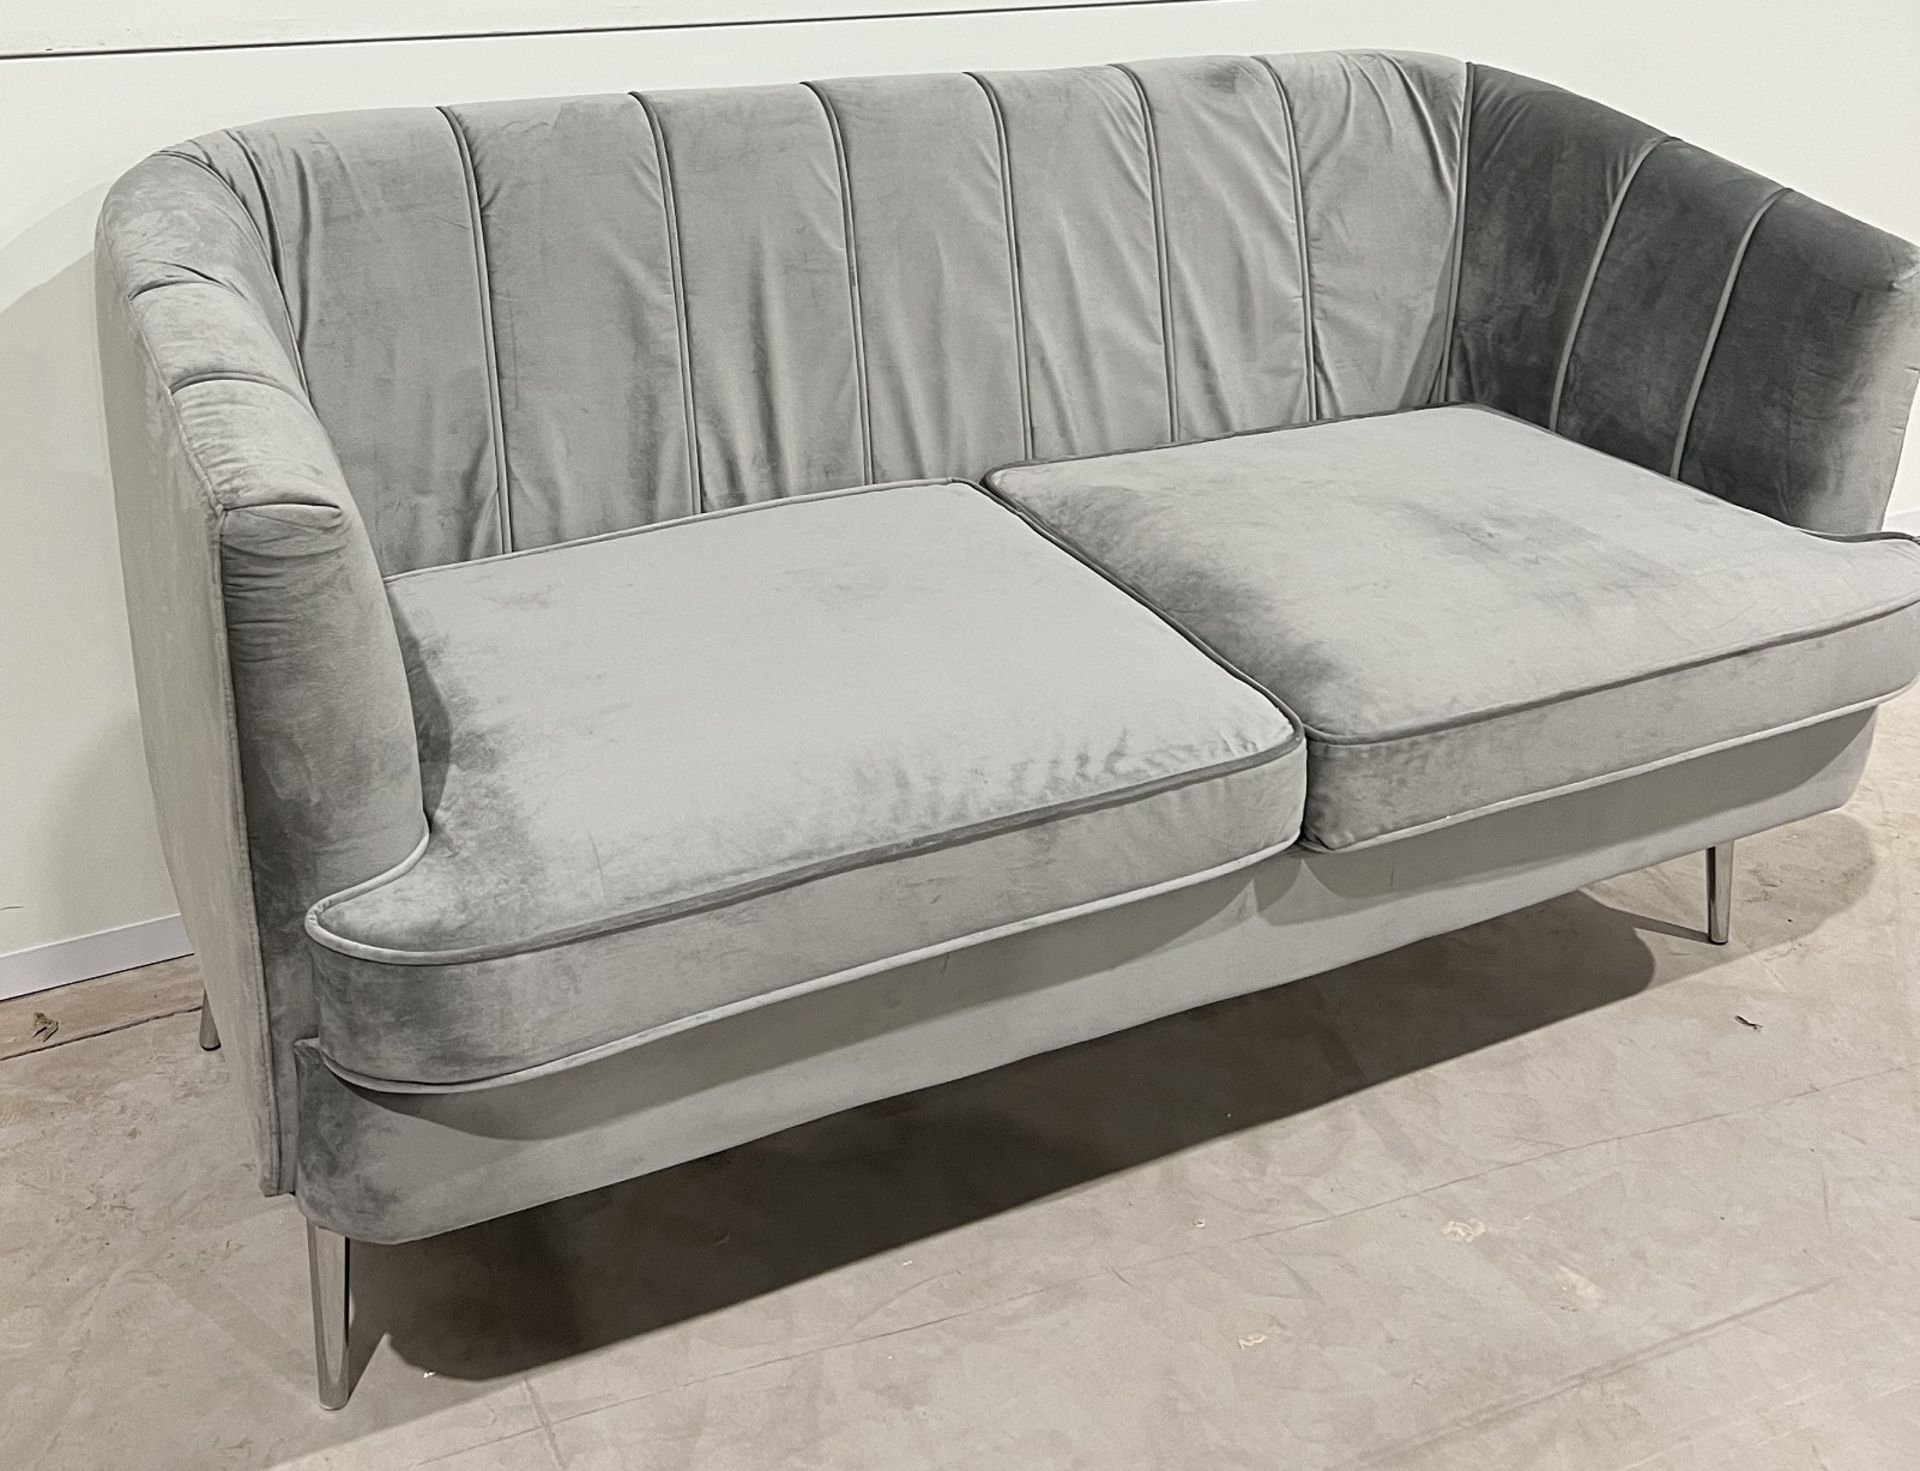 Lulu Sofa In Grey Velvet With Silver Metal Legs Reminiscent Of An Exotic Seashell. Exceptionally - Image 3 of 4